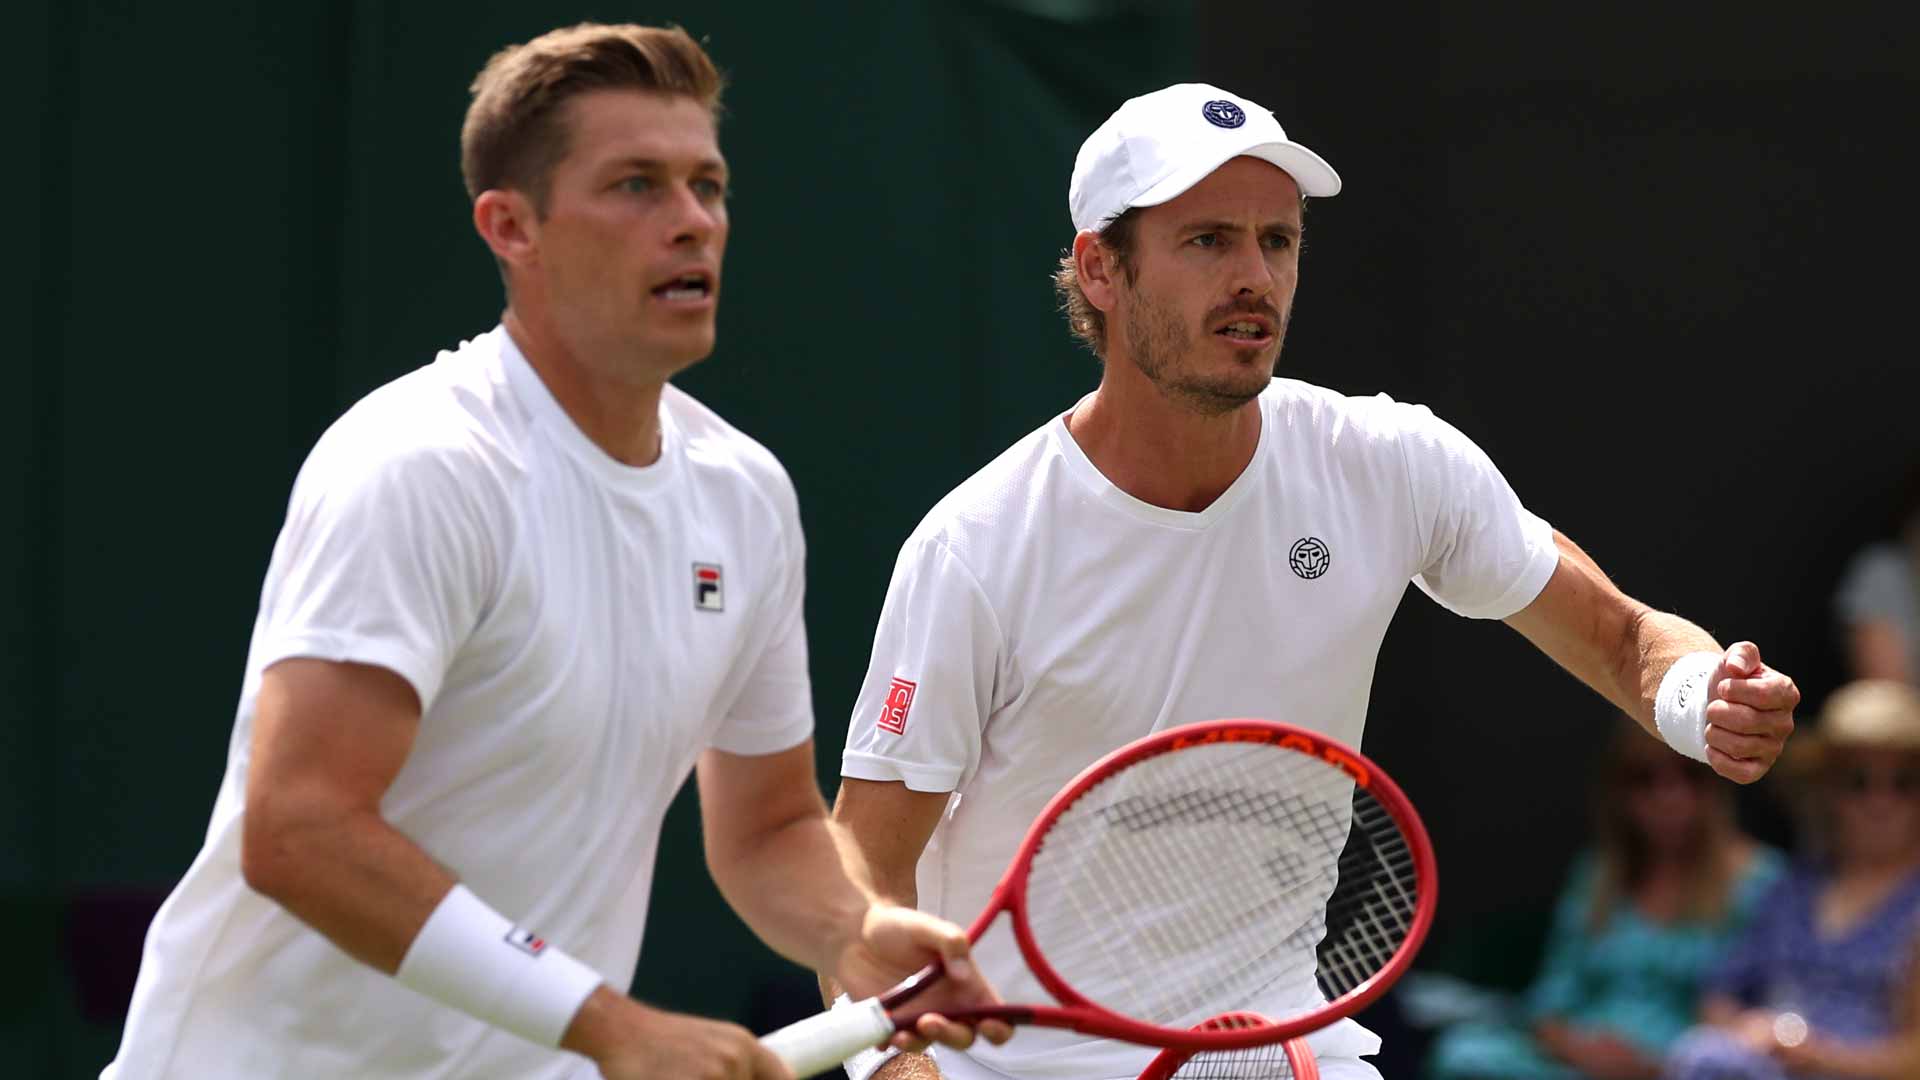 Neal Skupski (left) and Wesley Koolhof during Monday's action at Wimbledon.